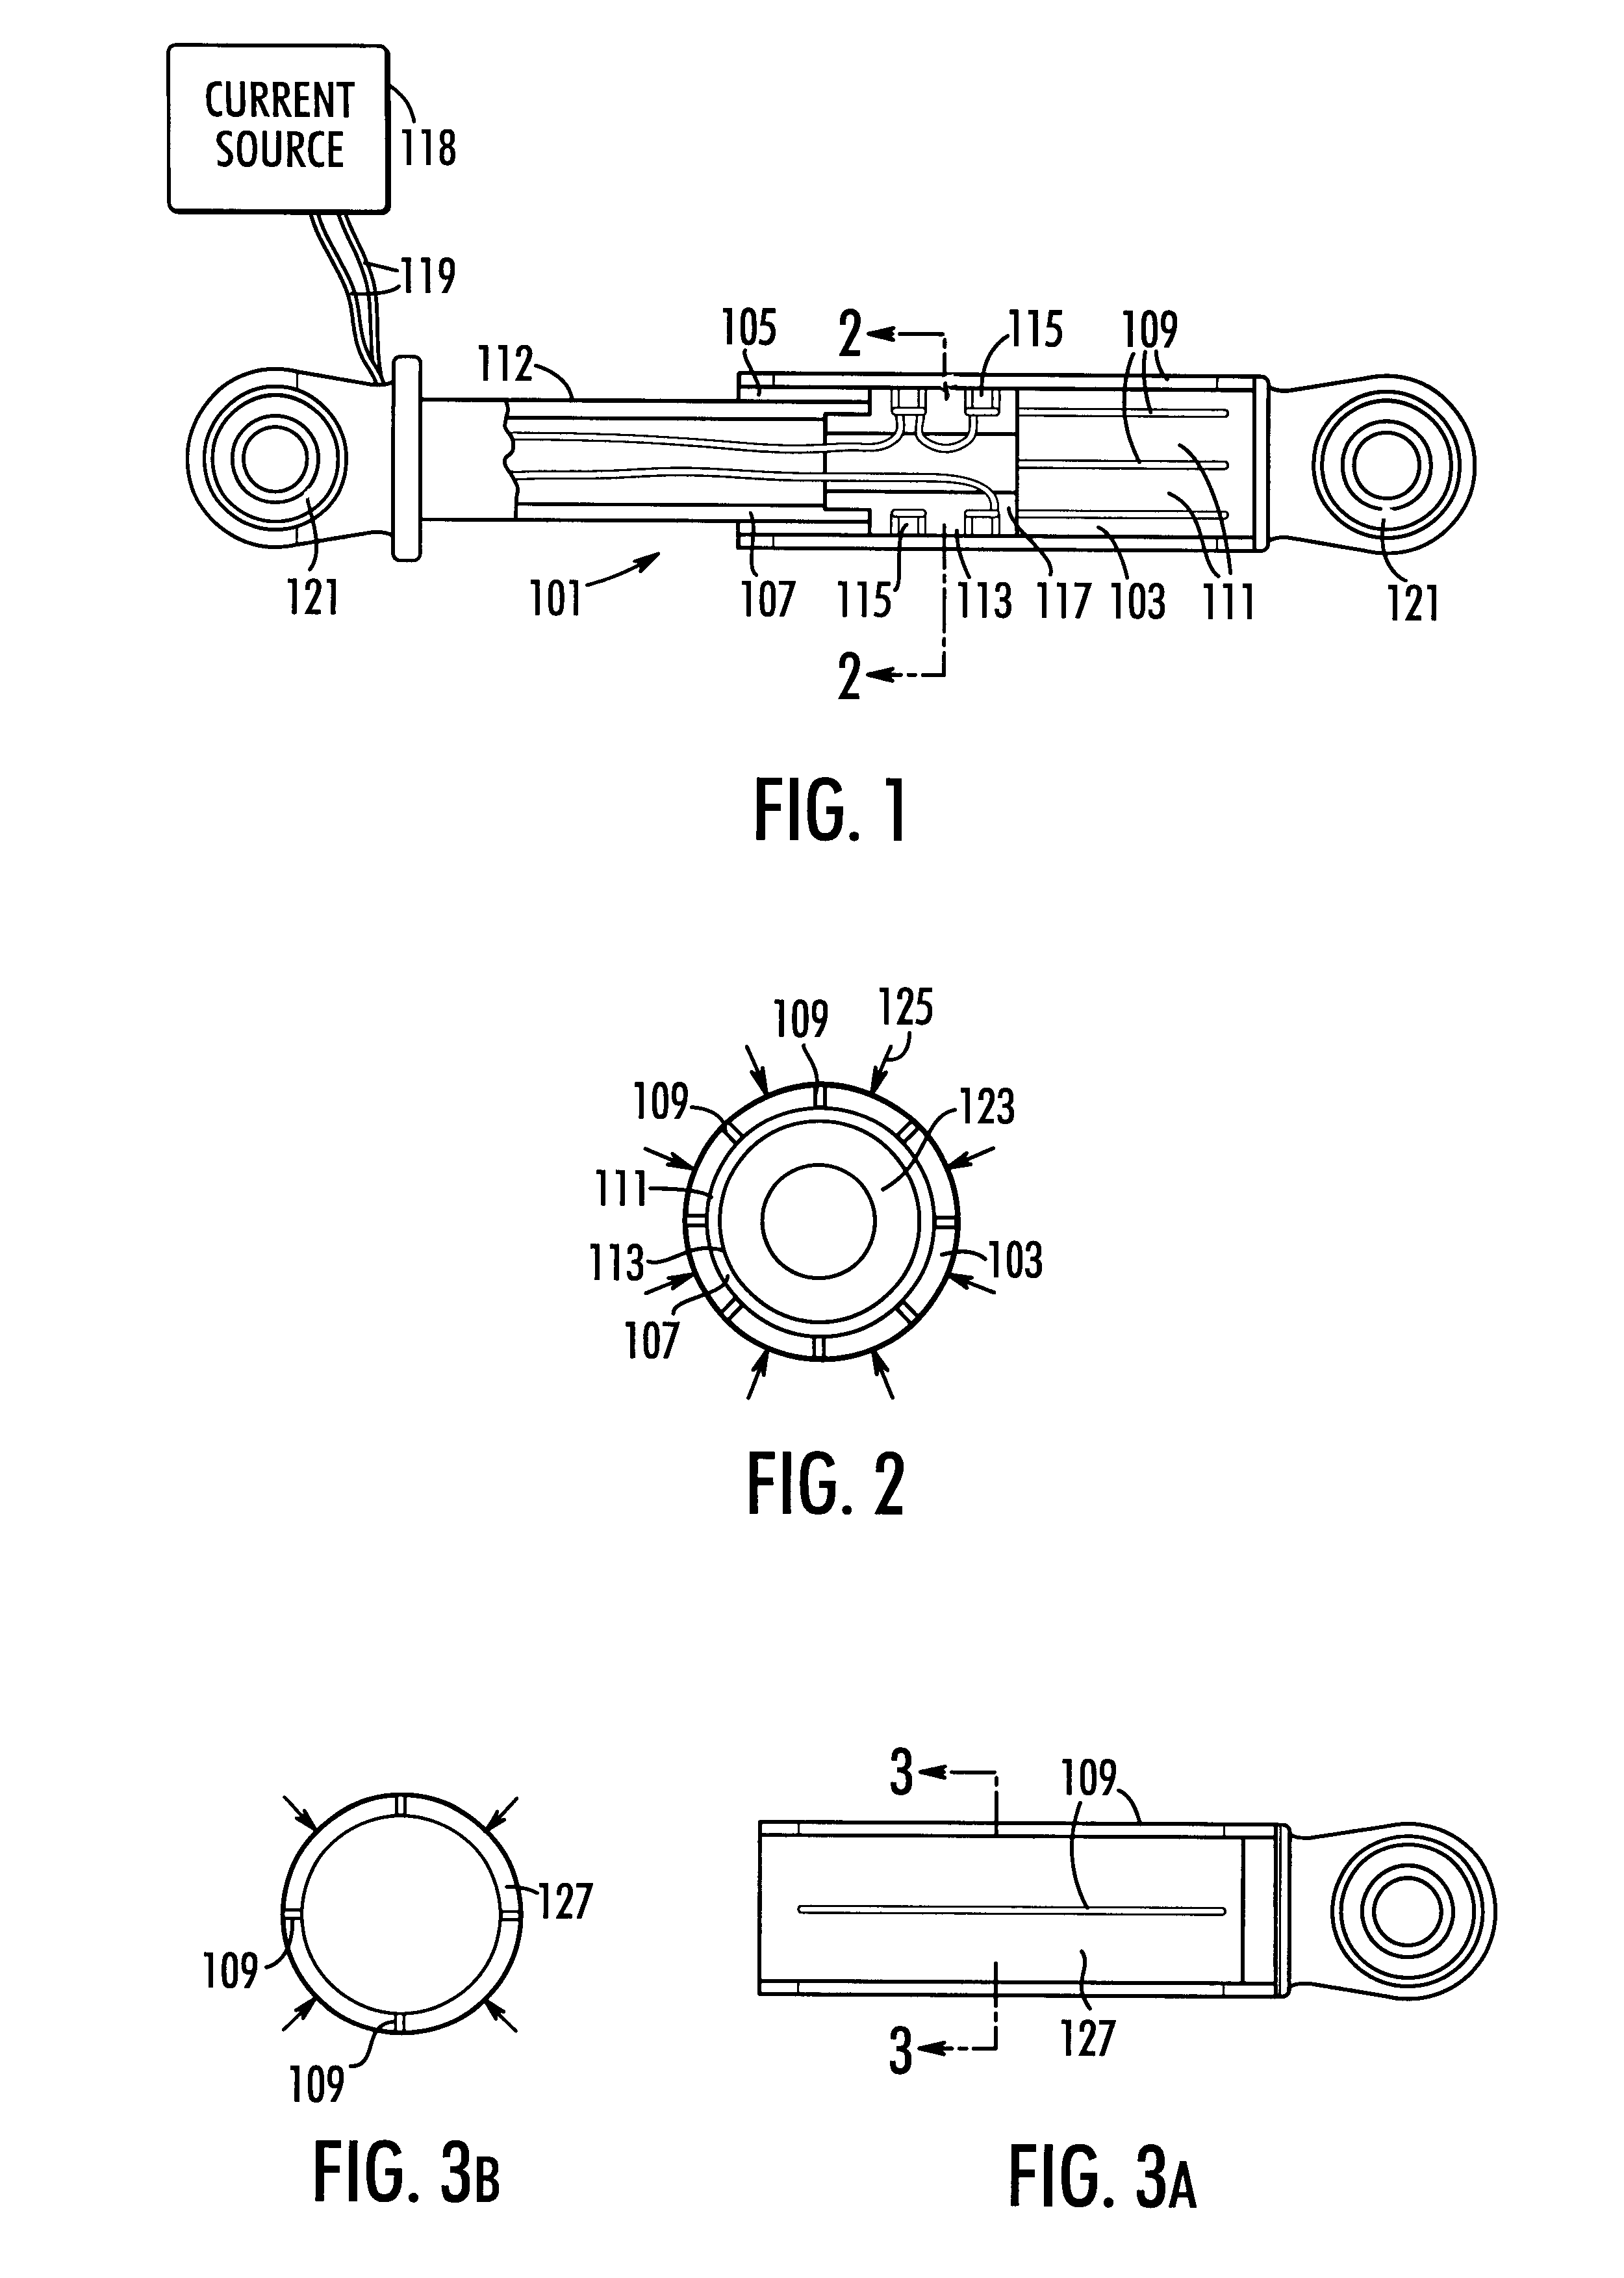 Magnetically actuated motion control device